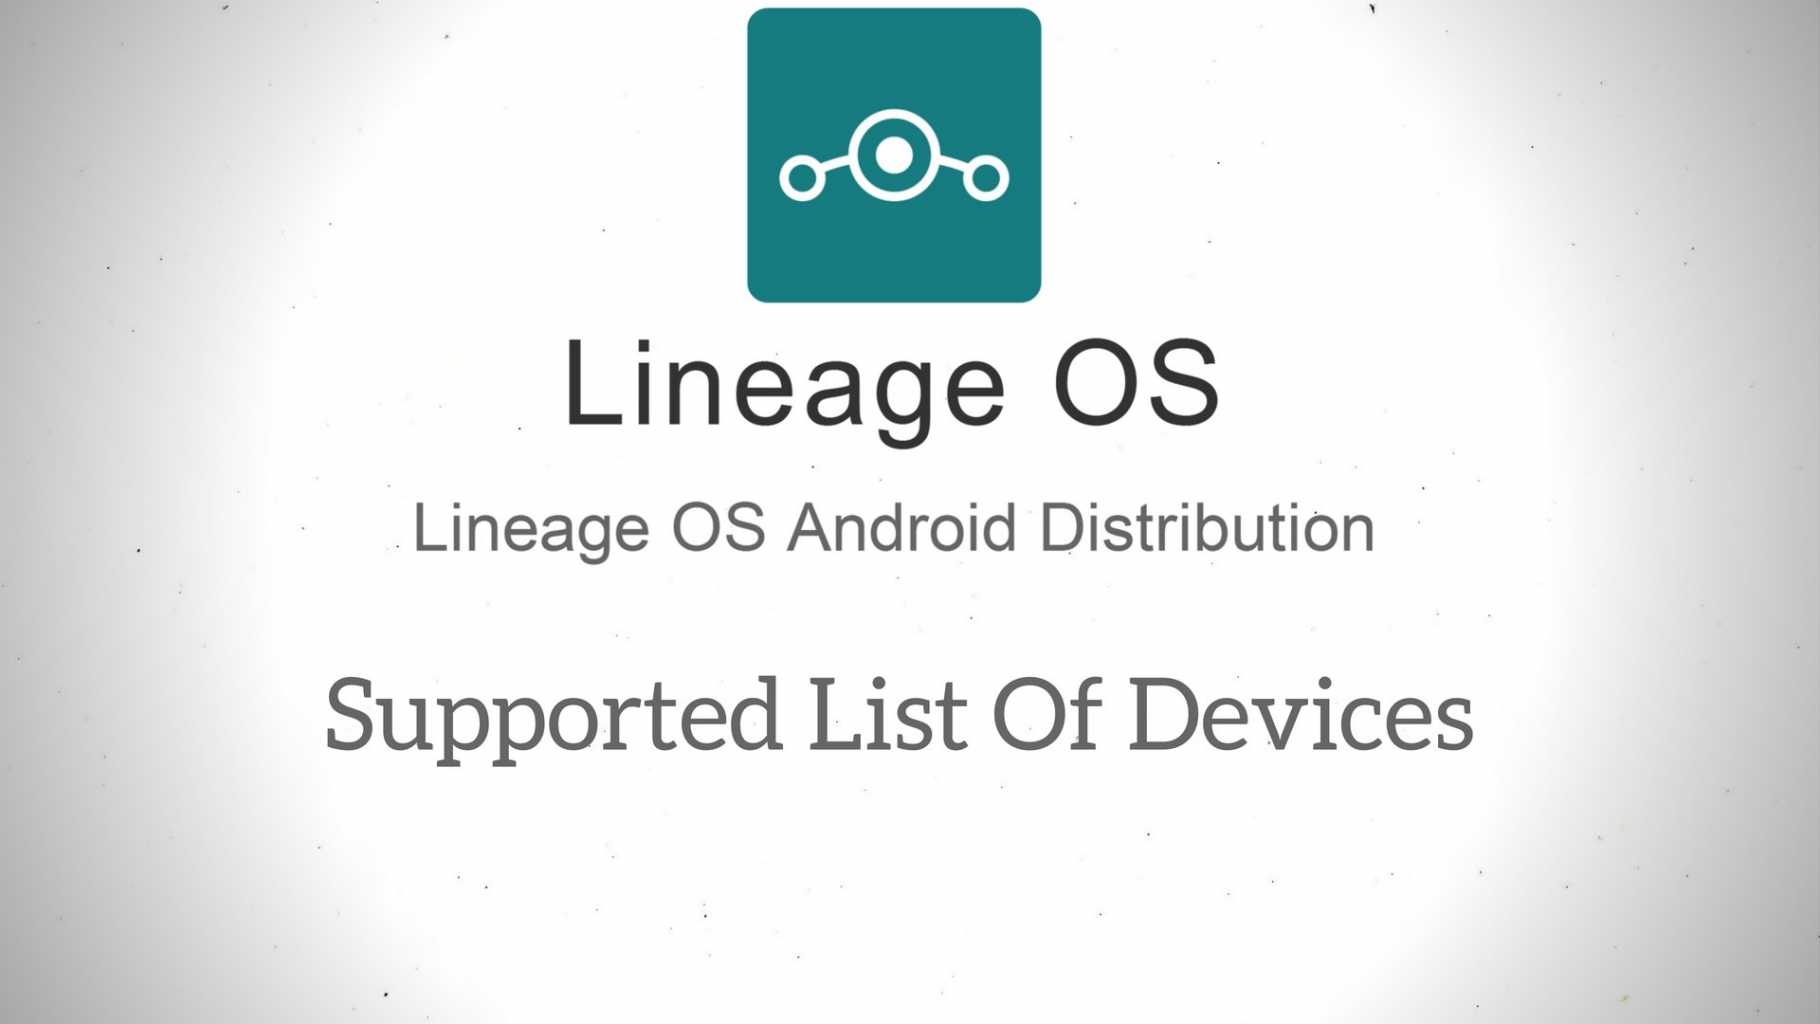 Supported List Of Devices for Official Lineage OS